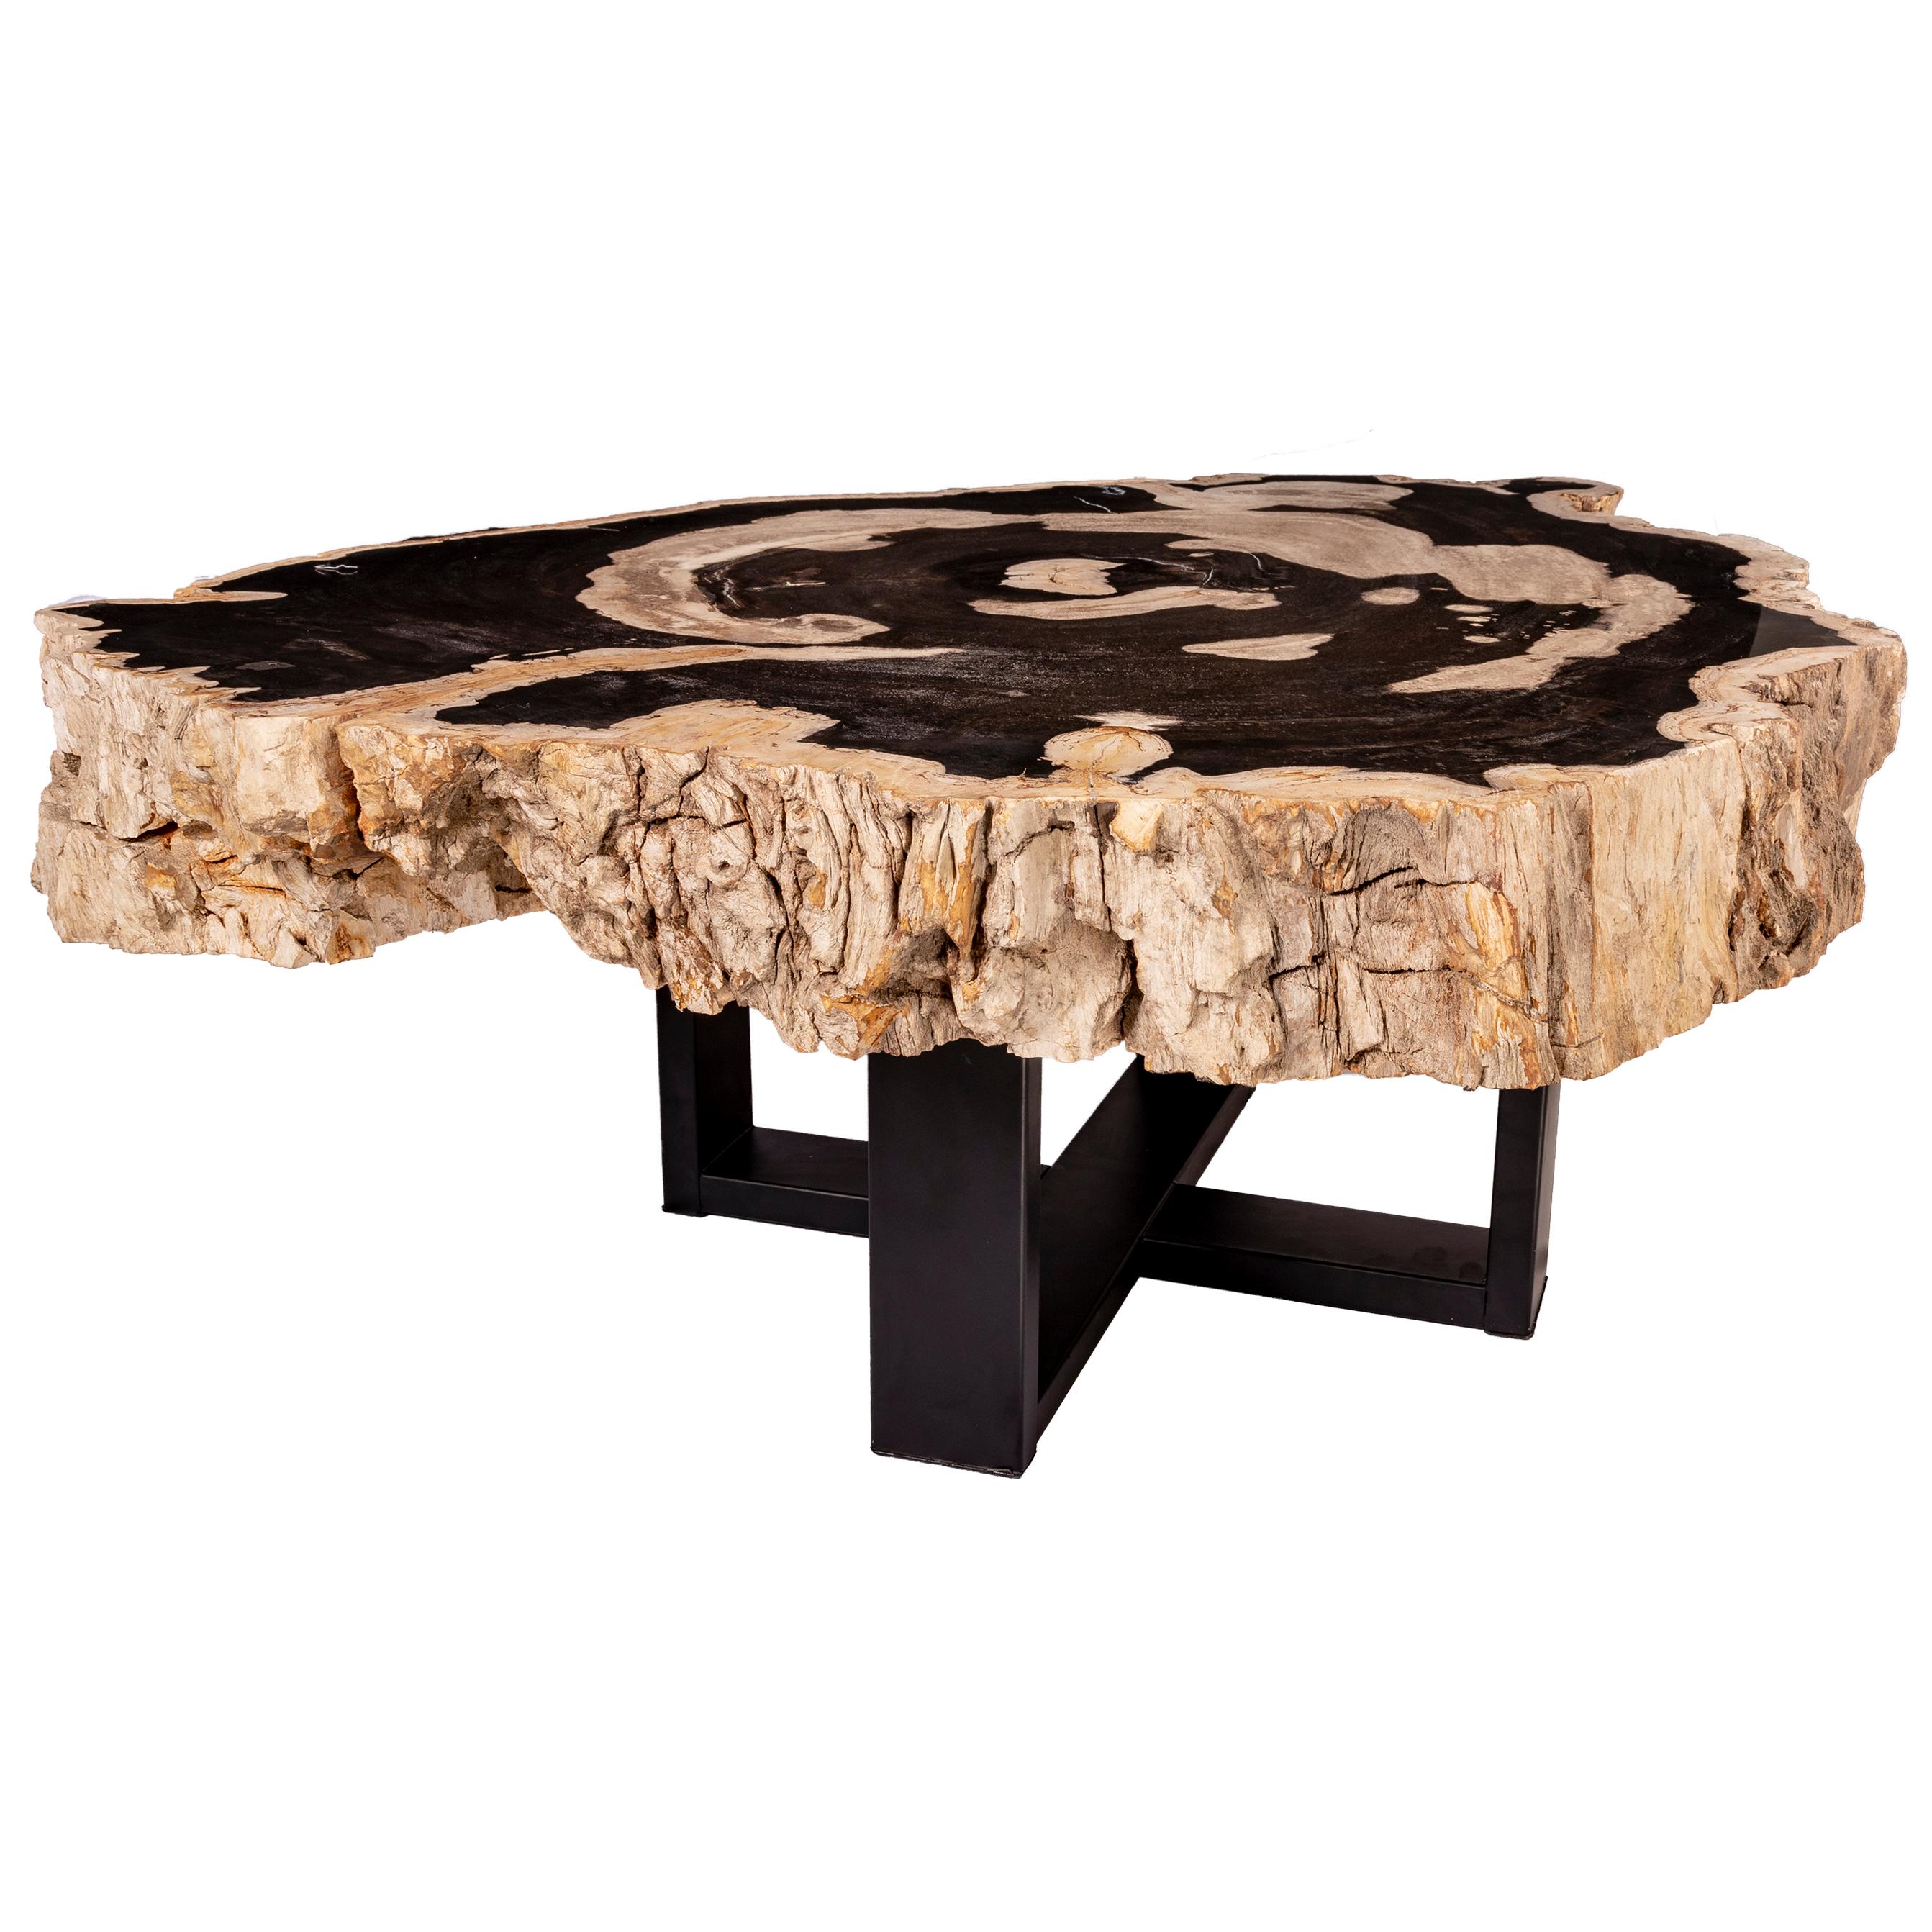 Center of Coffee Table, Natural Circular Shape, Petrified Wood with Metal Base 1